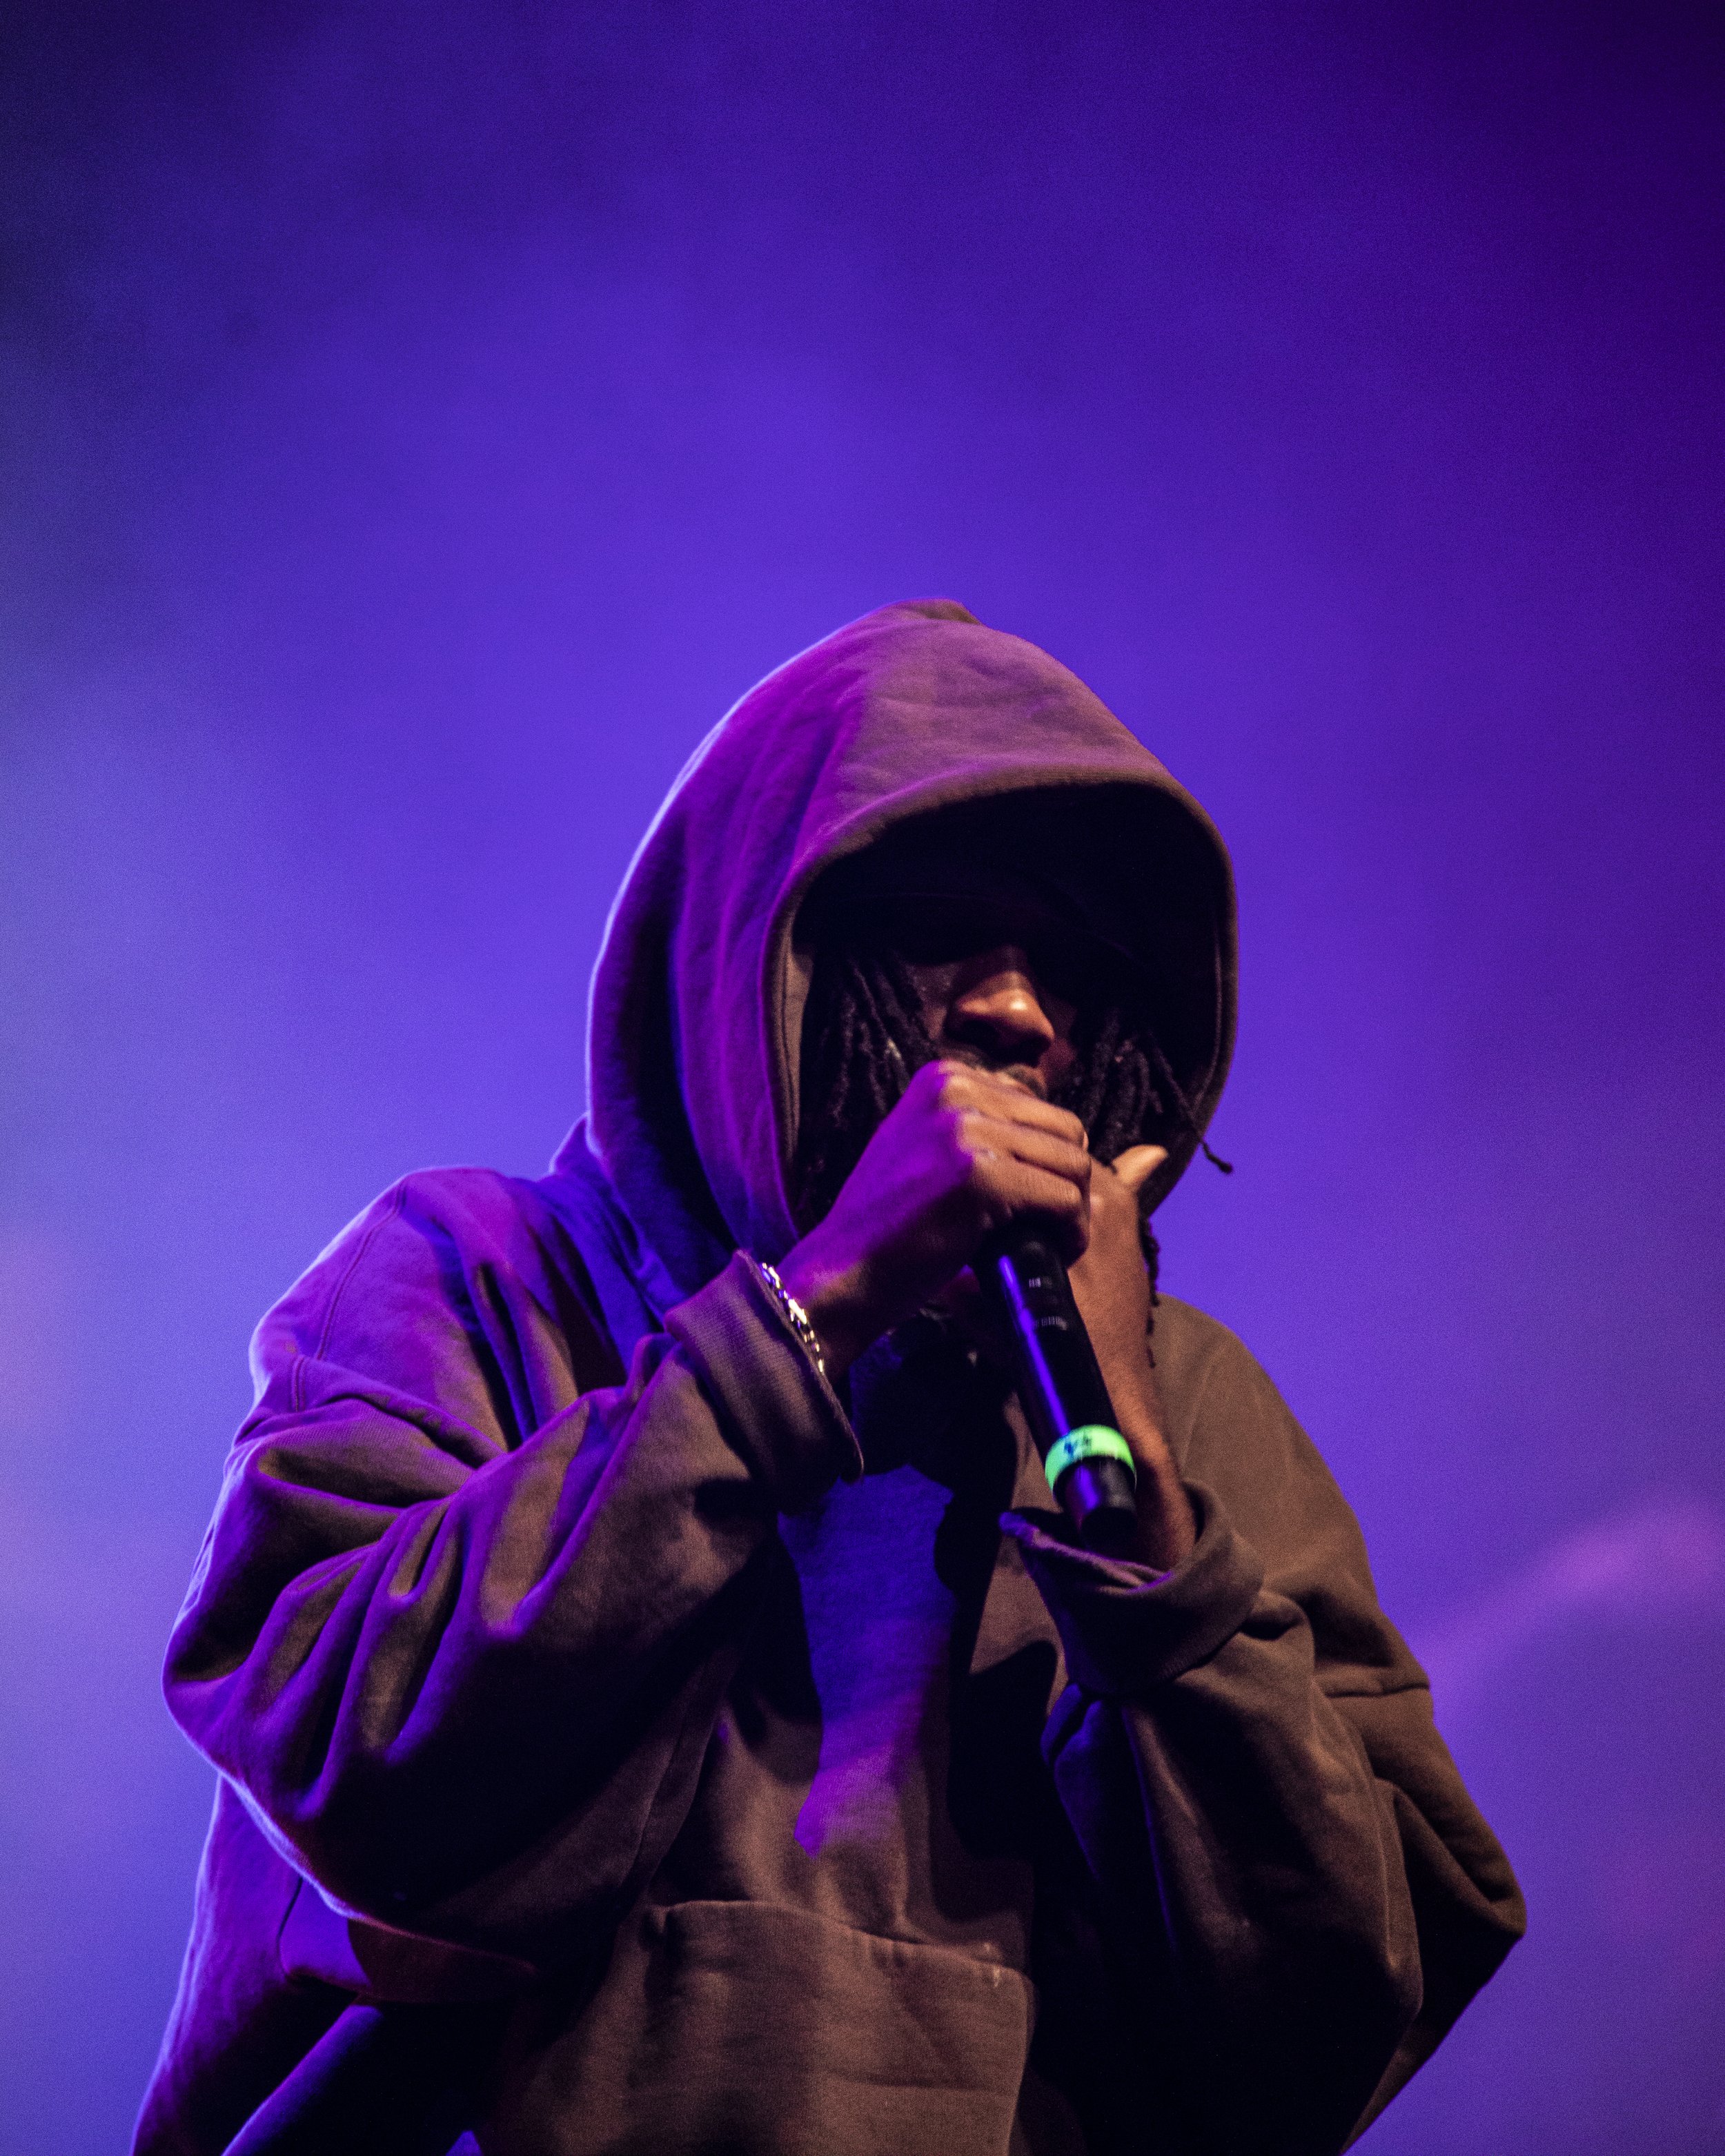 $not, Night Lovell, Eem Triplin, Dc The Don -  GET BUSY OR DIE NORTH AMERICAN TOUR 2023 - Fillmore Auditorium - Denver, Colorado - Monday, May 29, 2023 - PHOTO BY Mowgli Miles of Interracial Friends-45.JPG